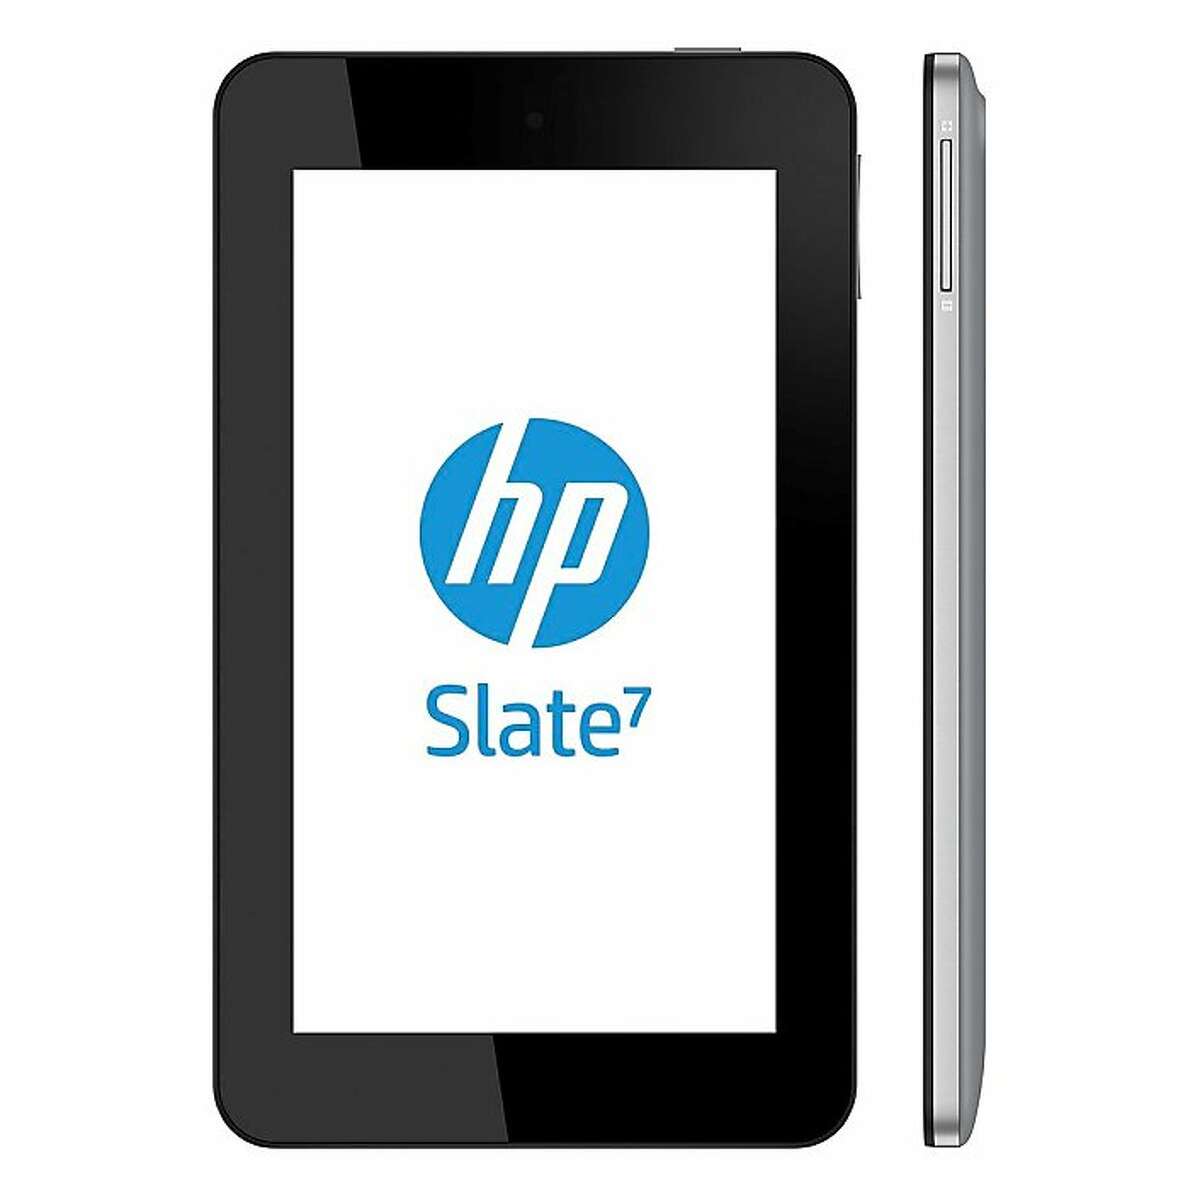 This undated product image provided by the Hewlett-Packard Co. shows the company's new tablet computer announced Sunday, Feb. 24, 2013. The HP Slate 7 will have a 7-inch screen, making it similar in size to the Amazon Kindle Fire. It will cost $169 when it goes on sale in April in the U.S. (AP Photo/Hewlett-Packard Co.)